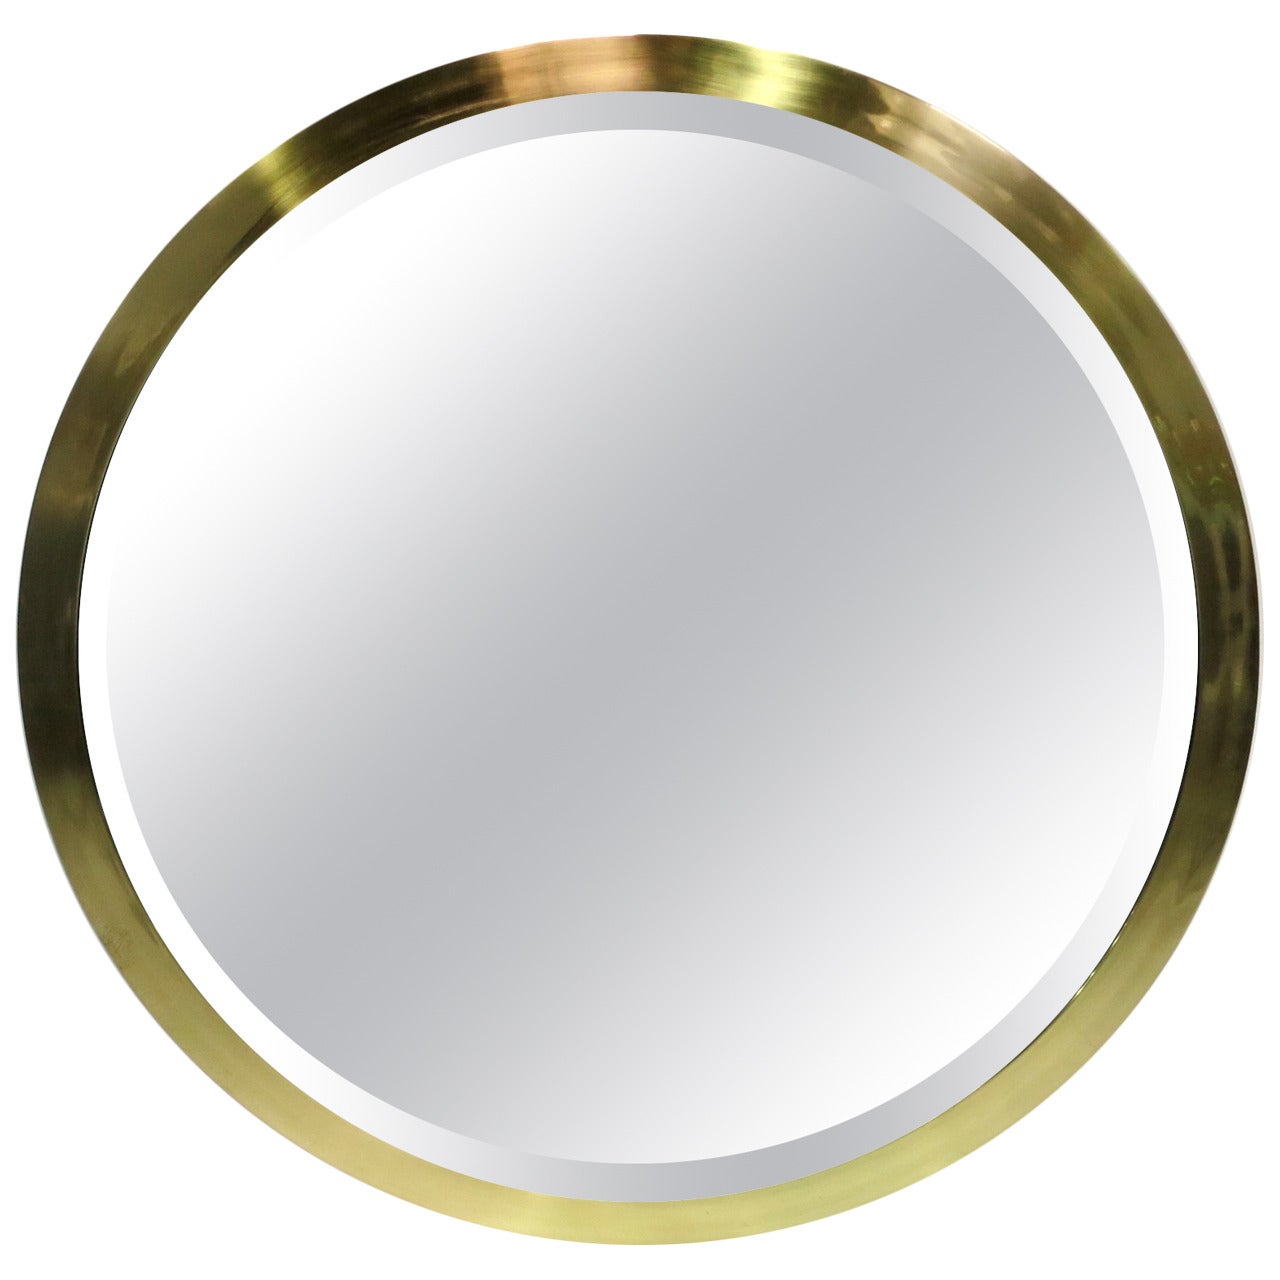 Large-Scale Round Beveled Mirror with Brass Frame